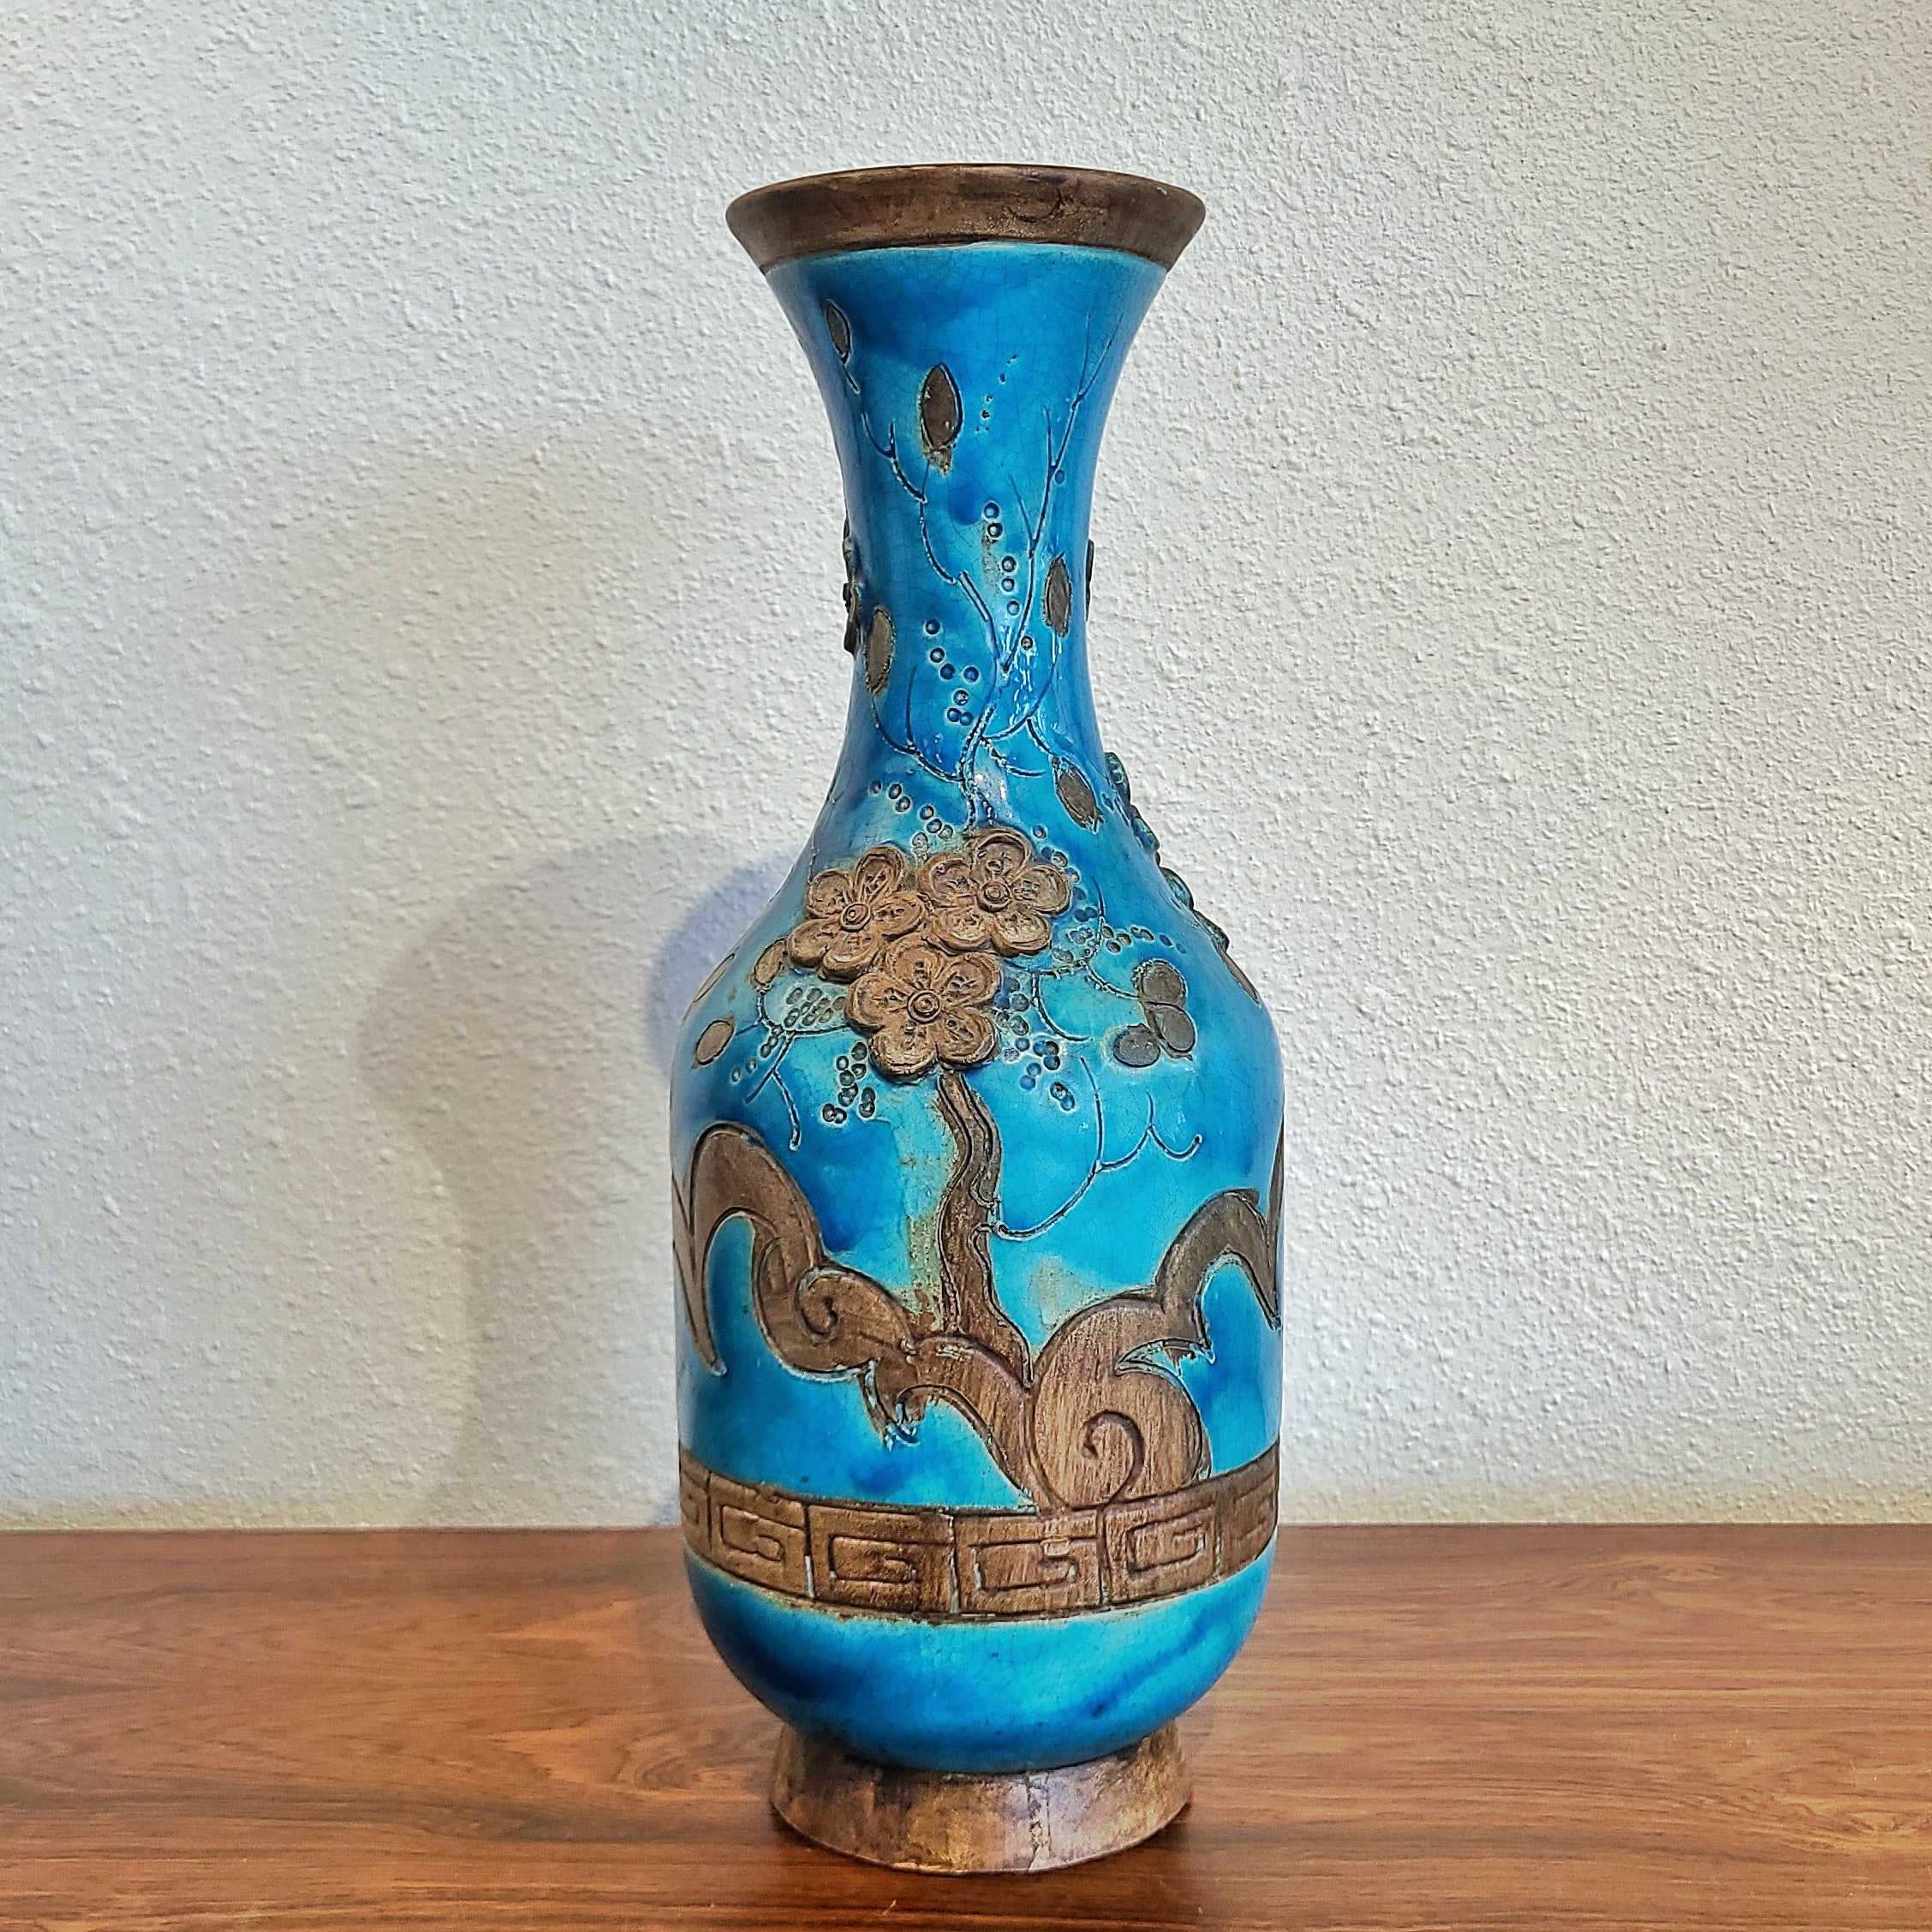 EARLY UGO ZACCAGNINI CHINOISERIE  VASE WITH CHERRY BLOSSOMS